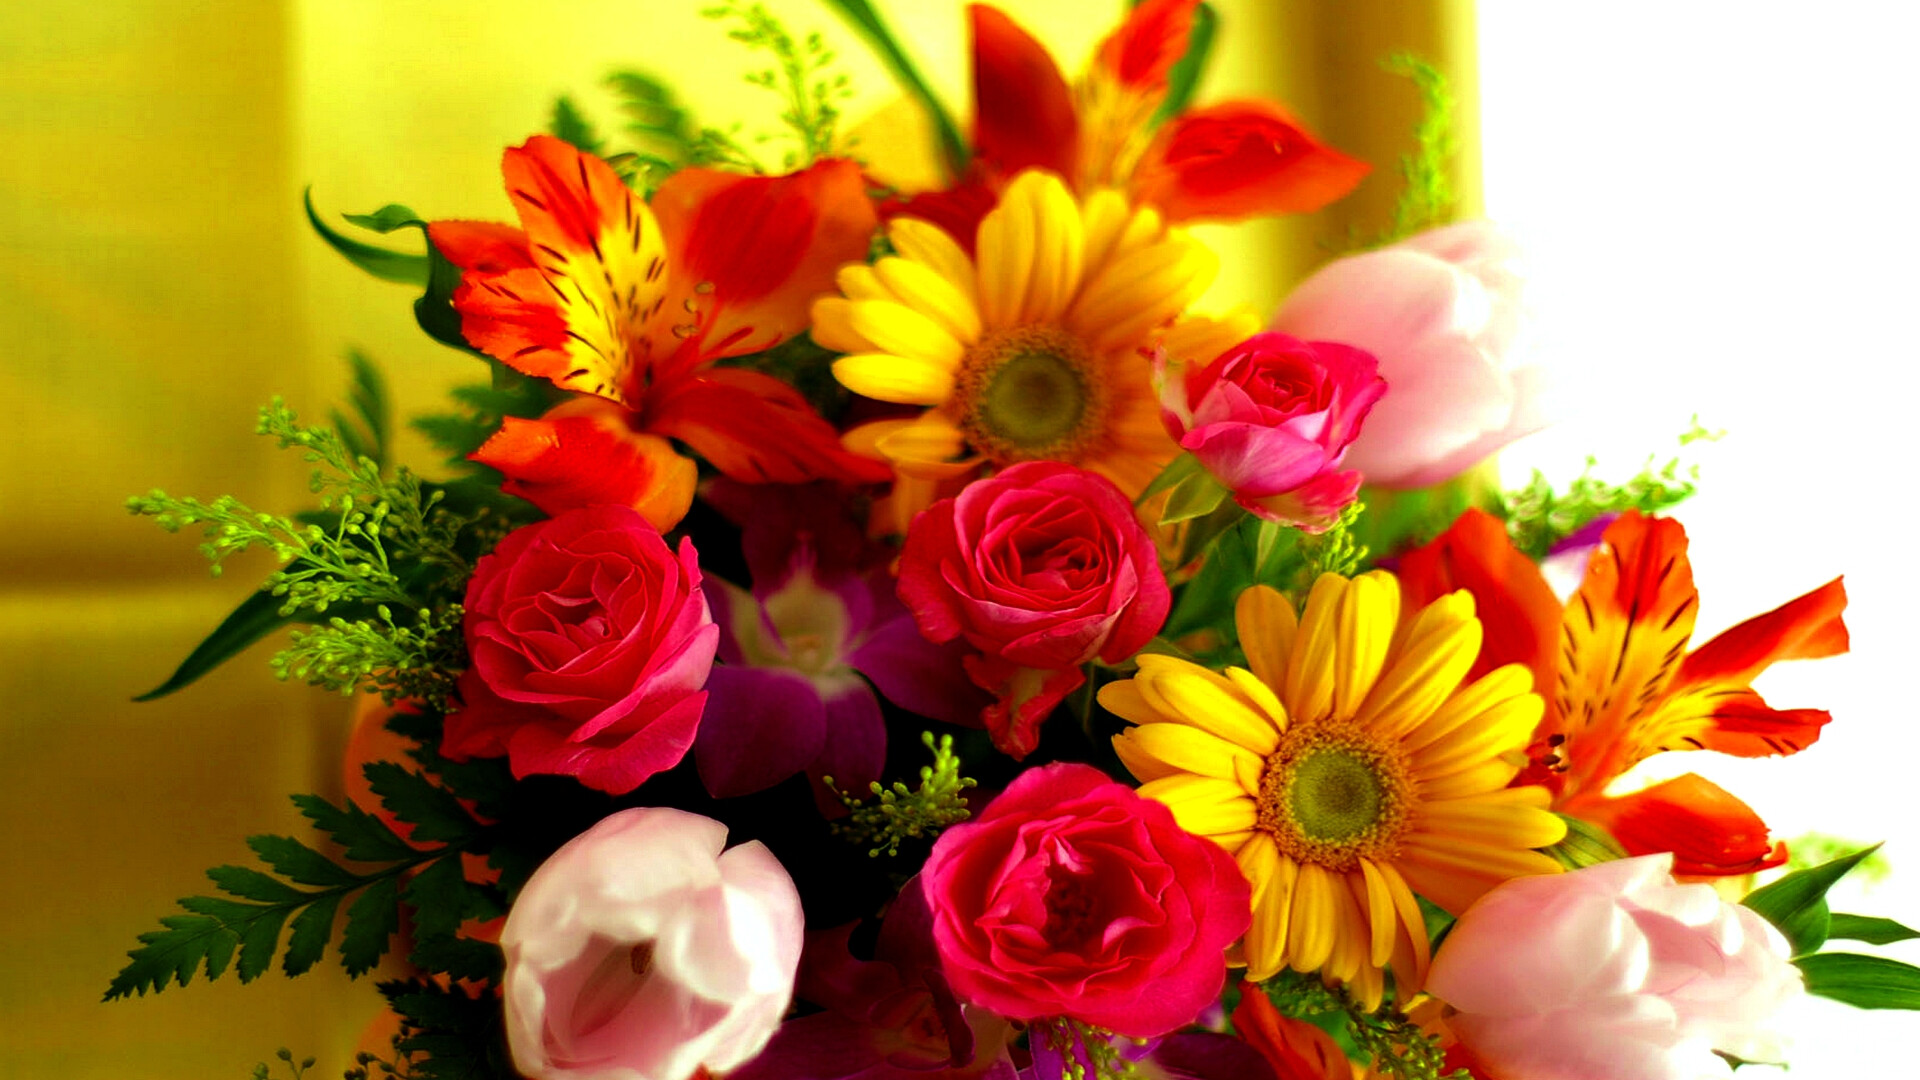 Flower Bouquet: A group of flowers selected and arranged into a design. 1920x1080 Full HD Background.